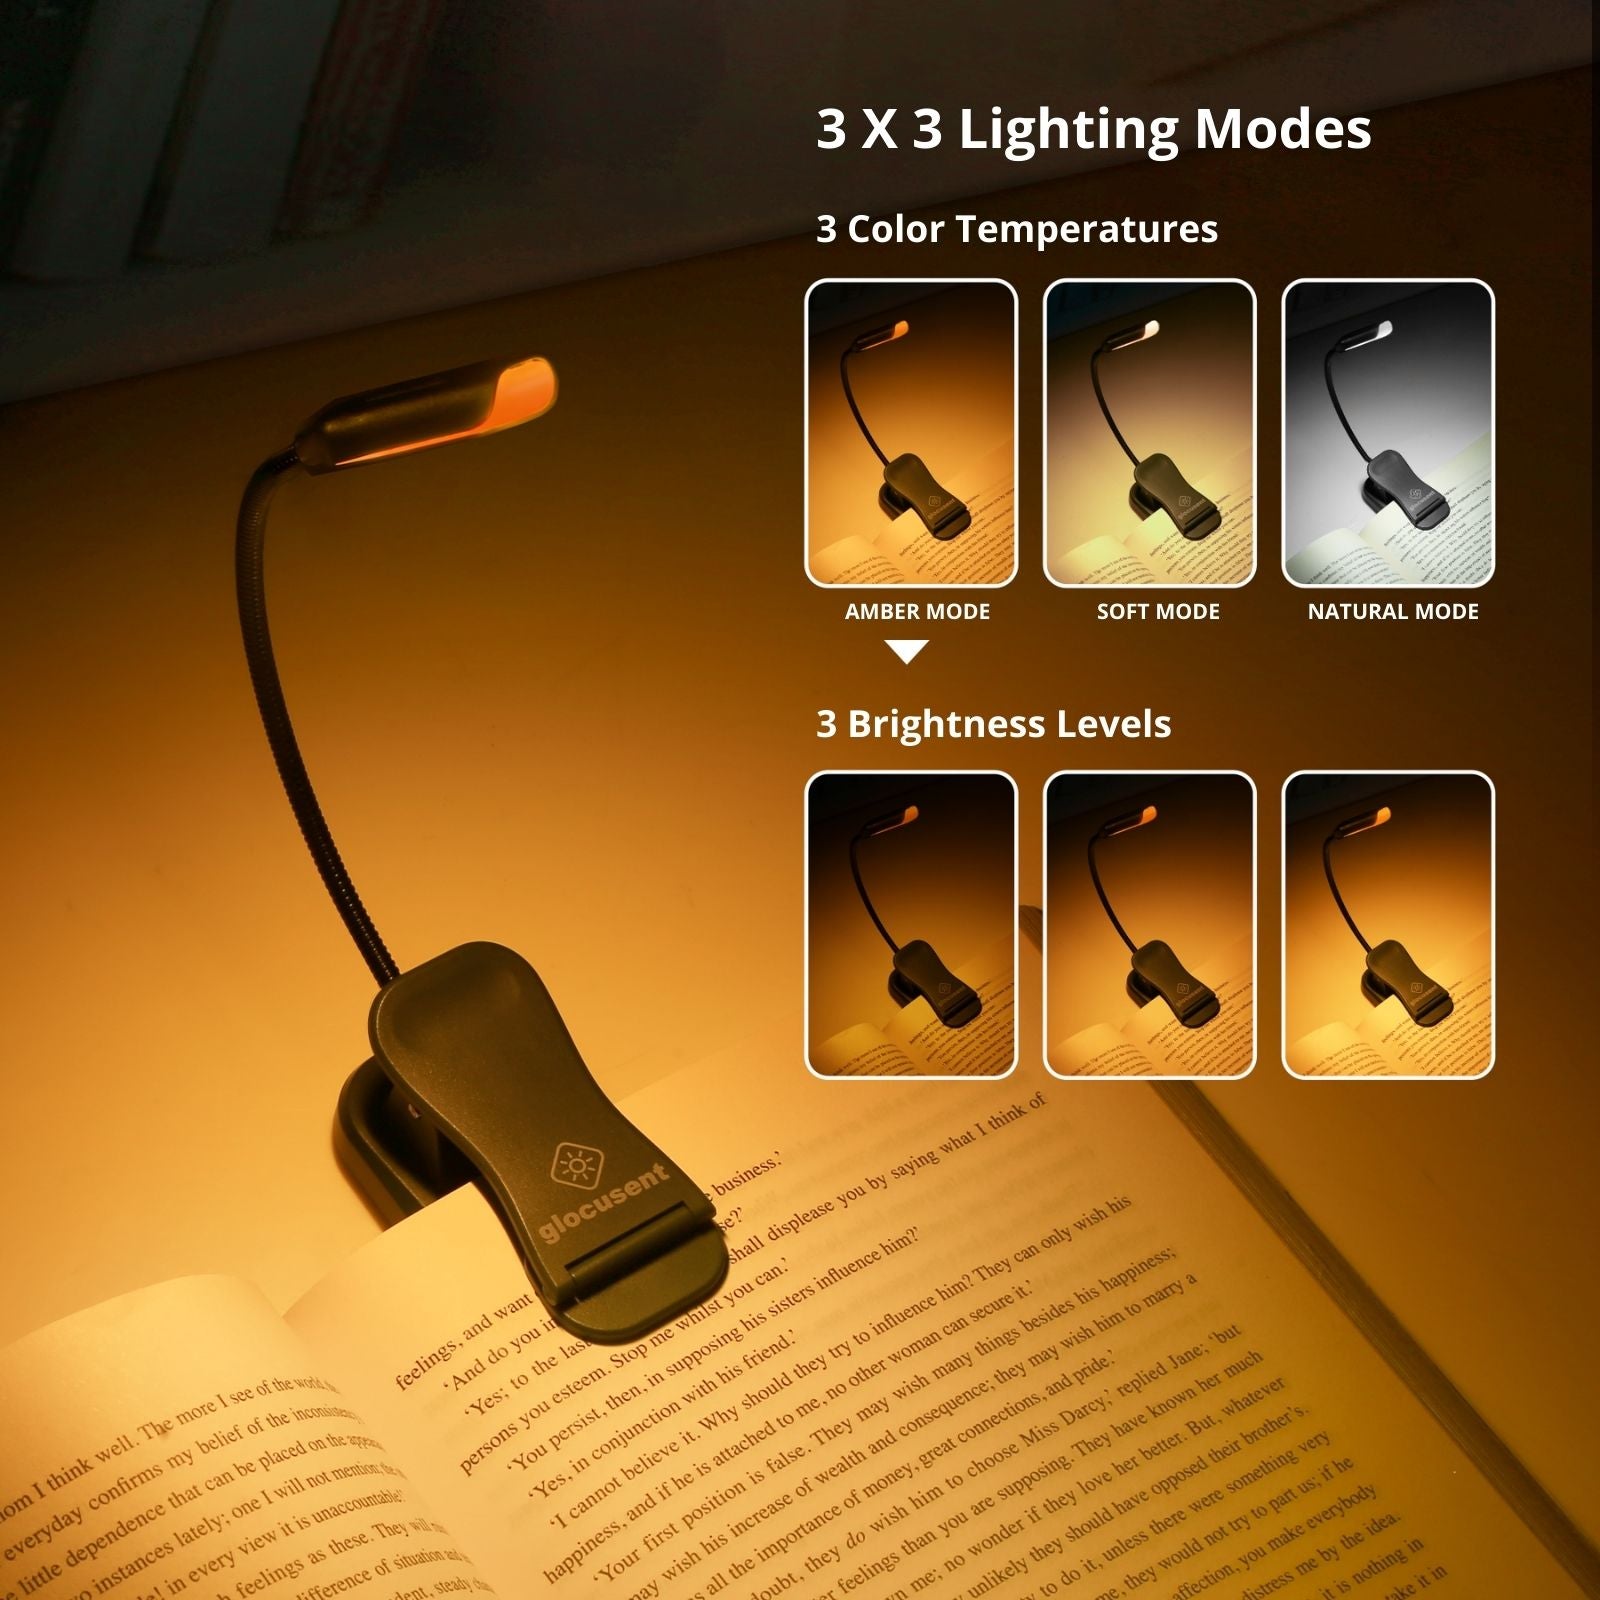 Lighting in the Library - Lighting Equipment Sales